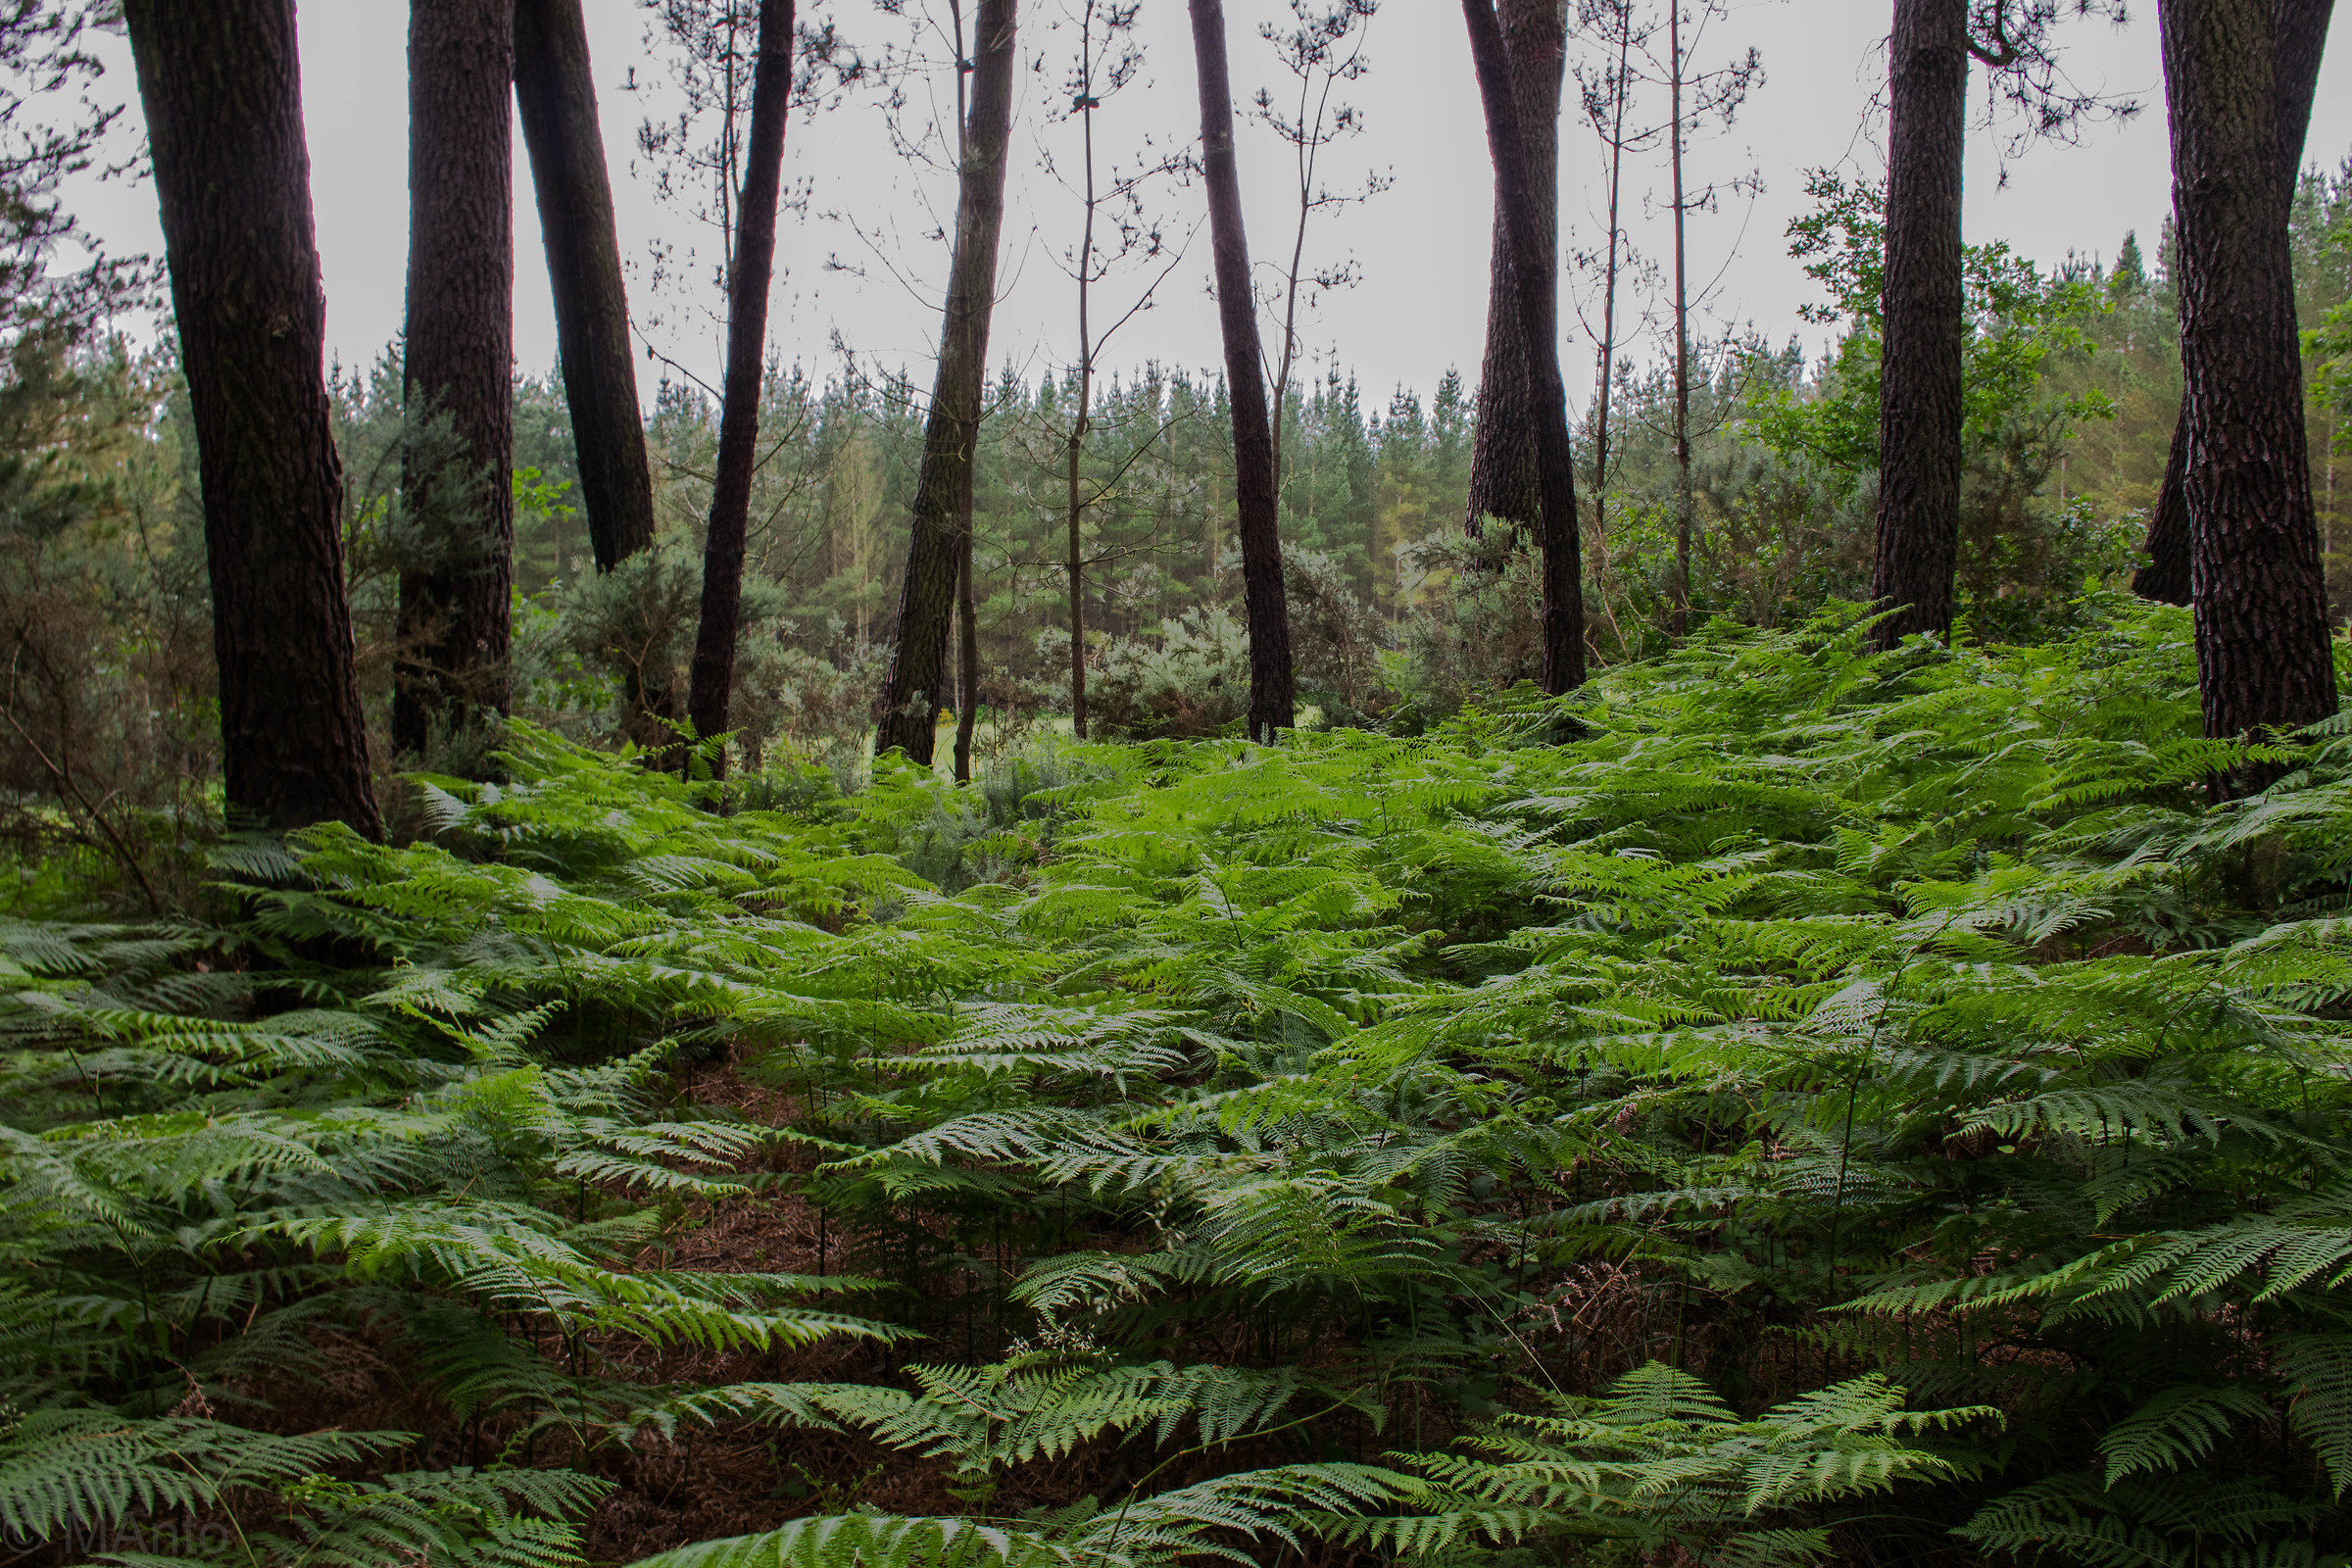 The forest and ferns...